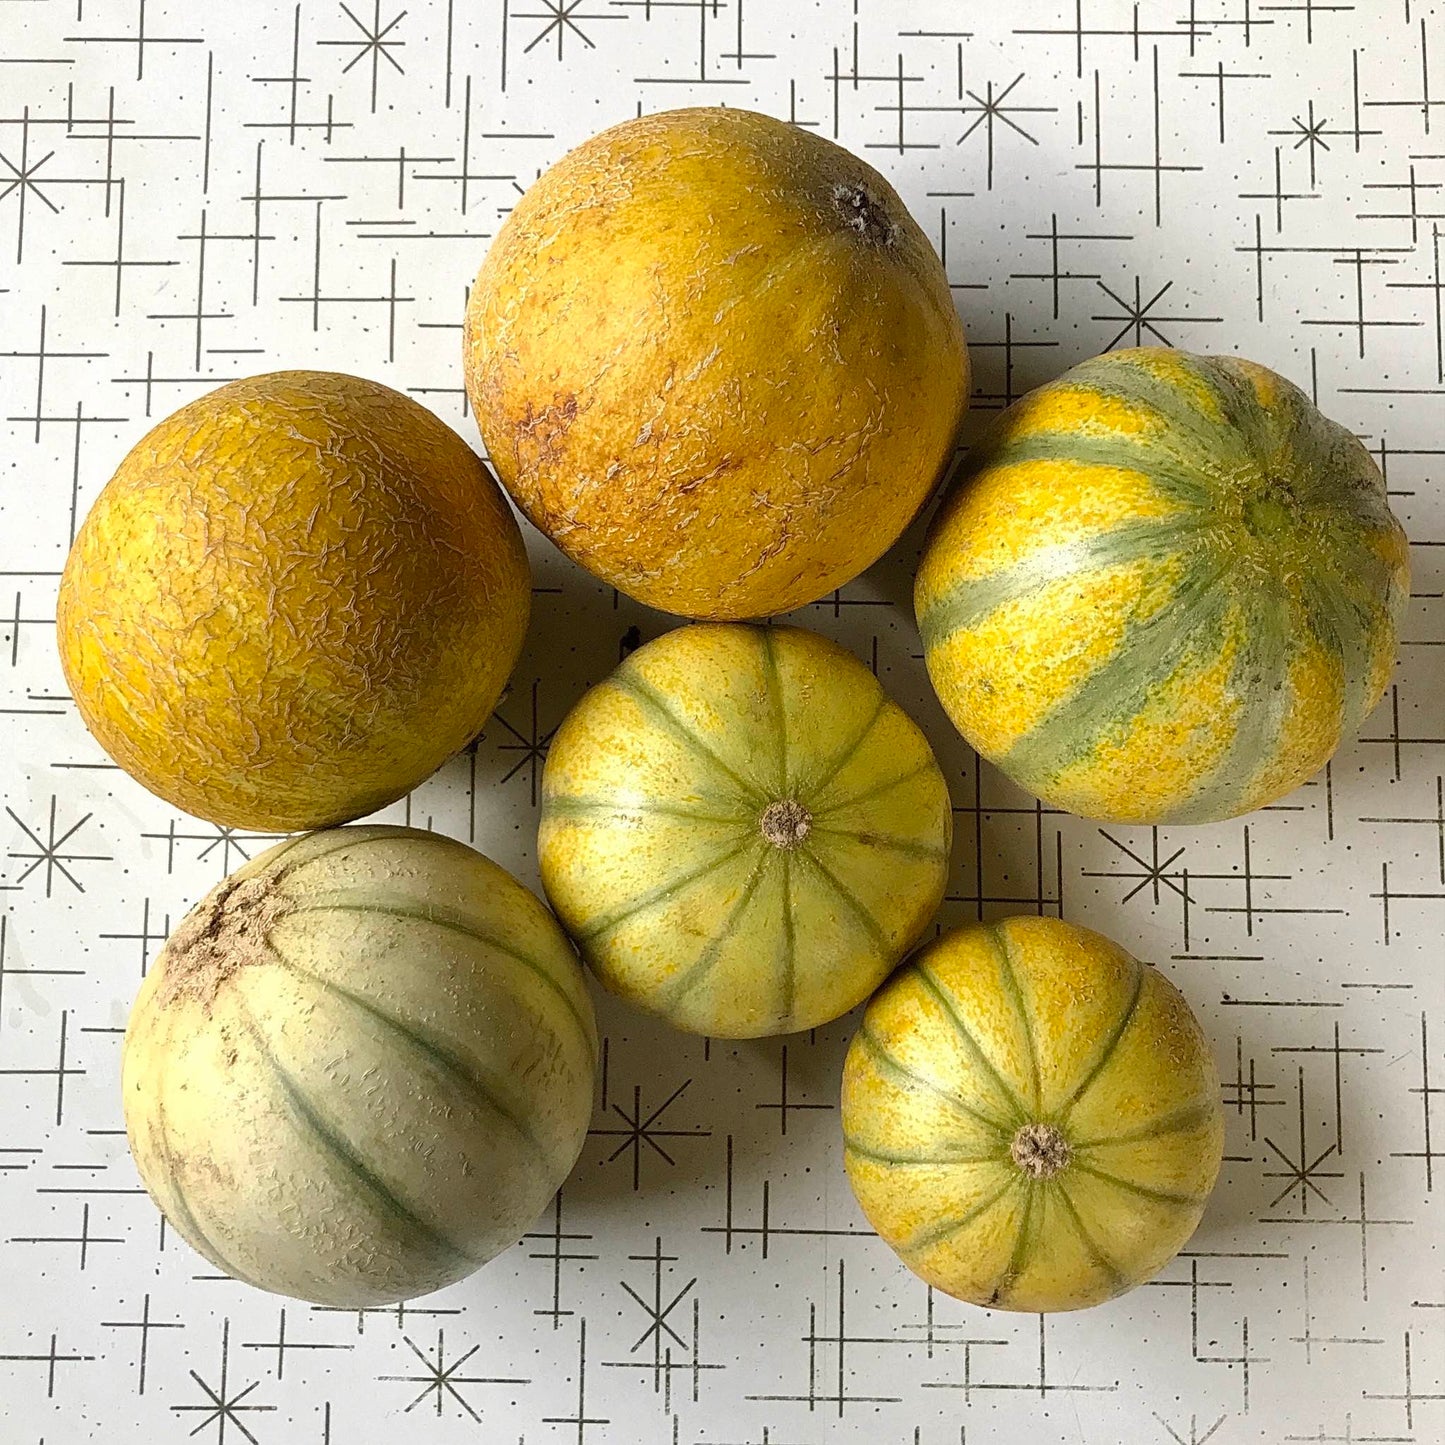 Six melons on a table.